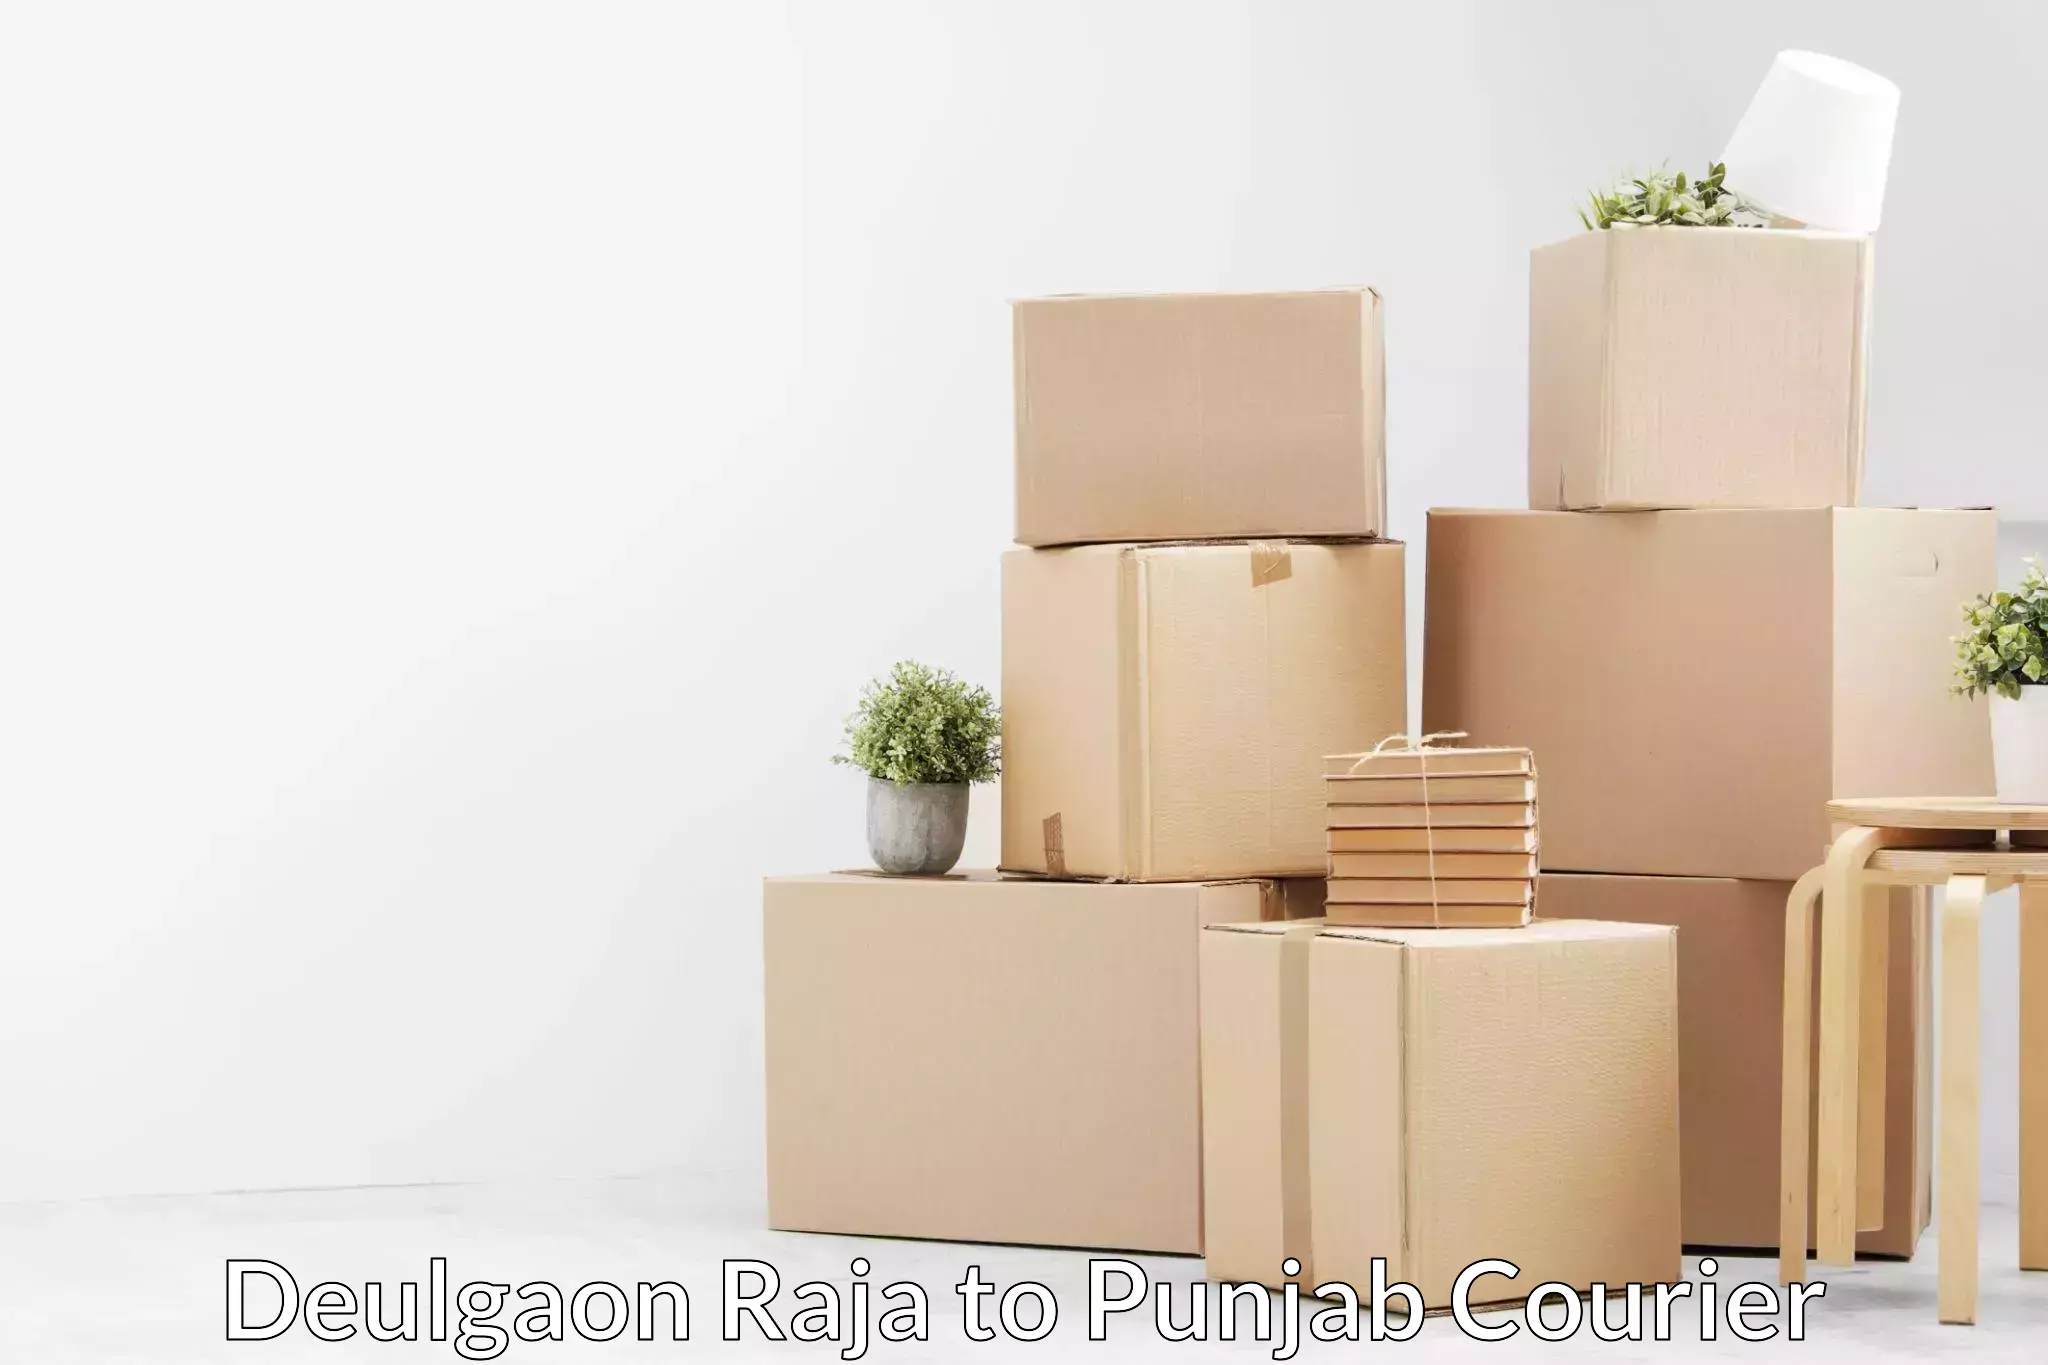 Trusted relocation services Deulgaon Raja to Mehta Chowk